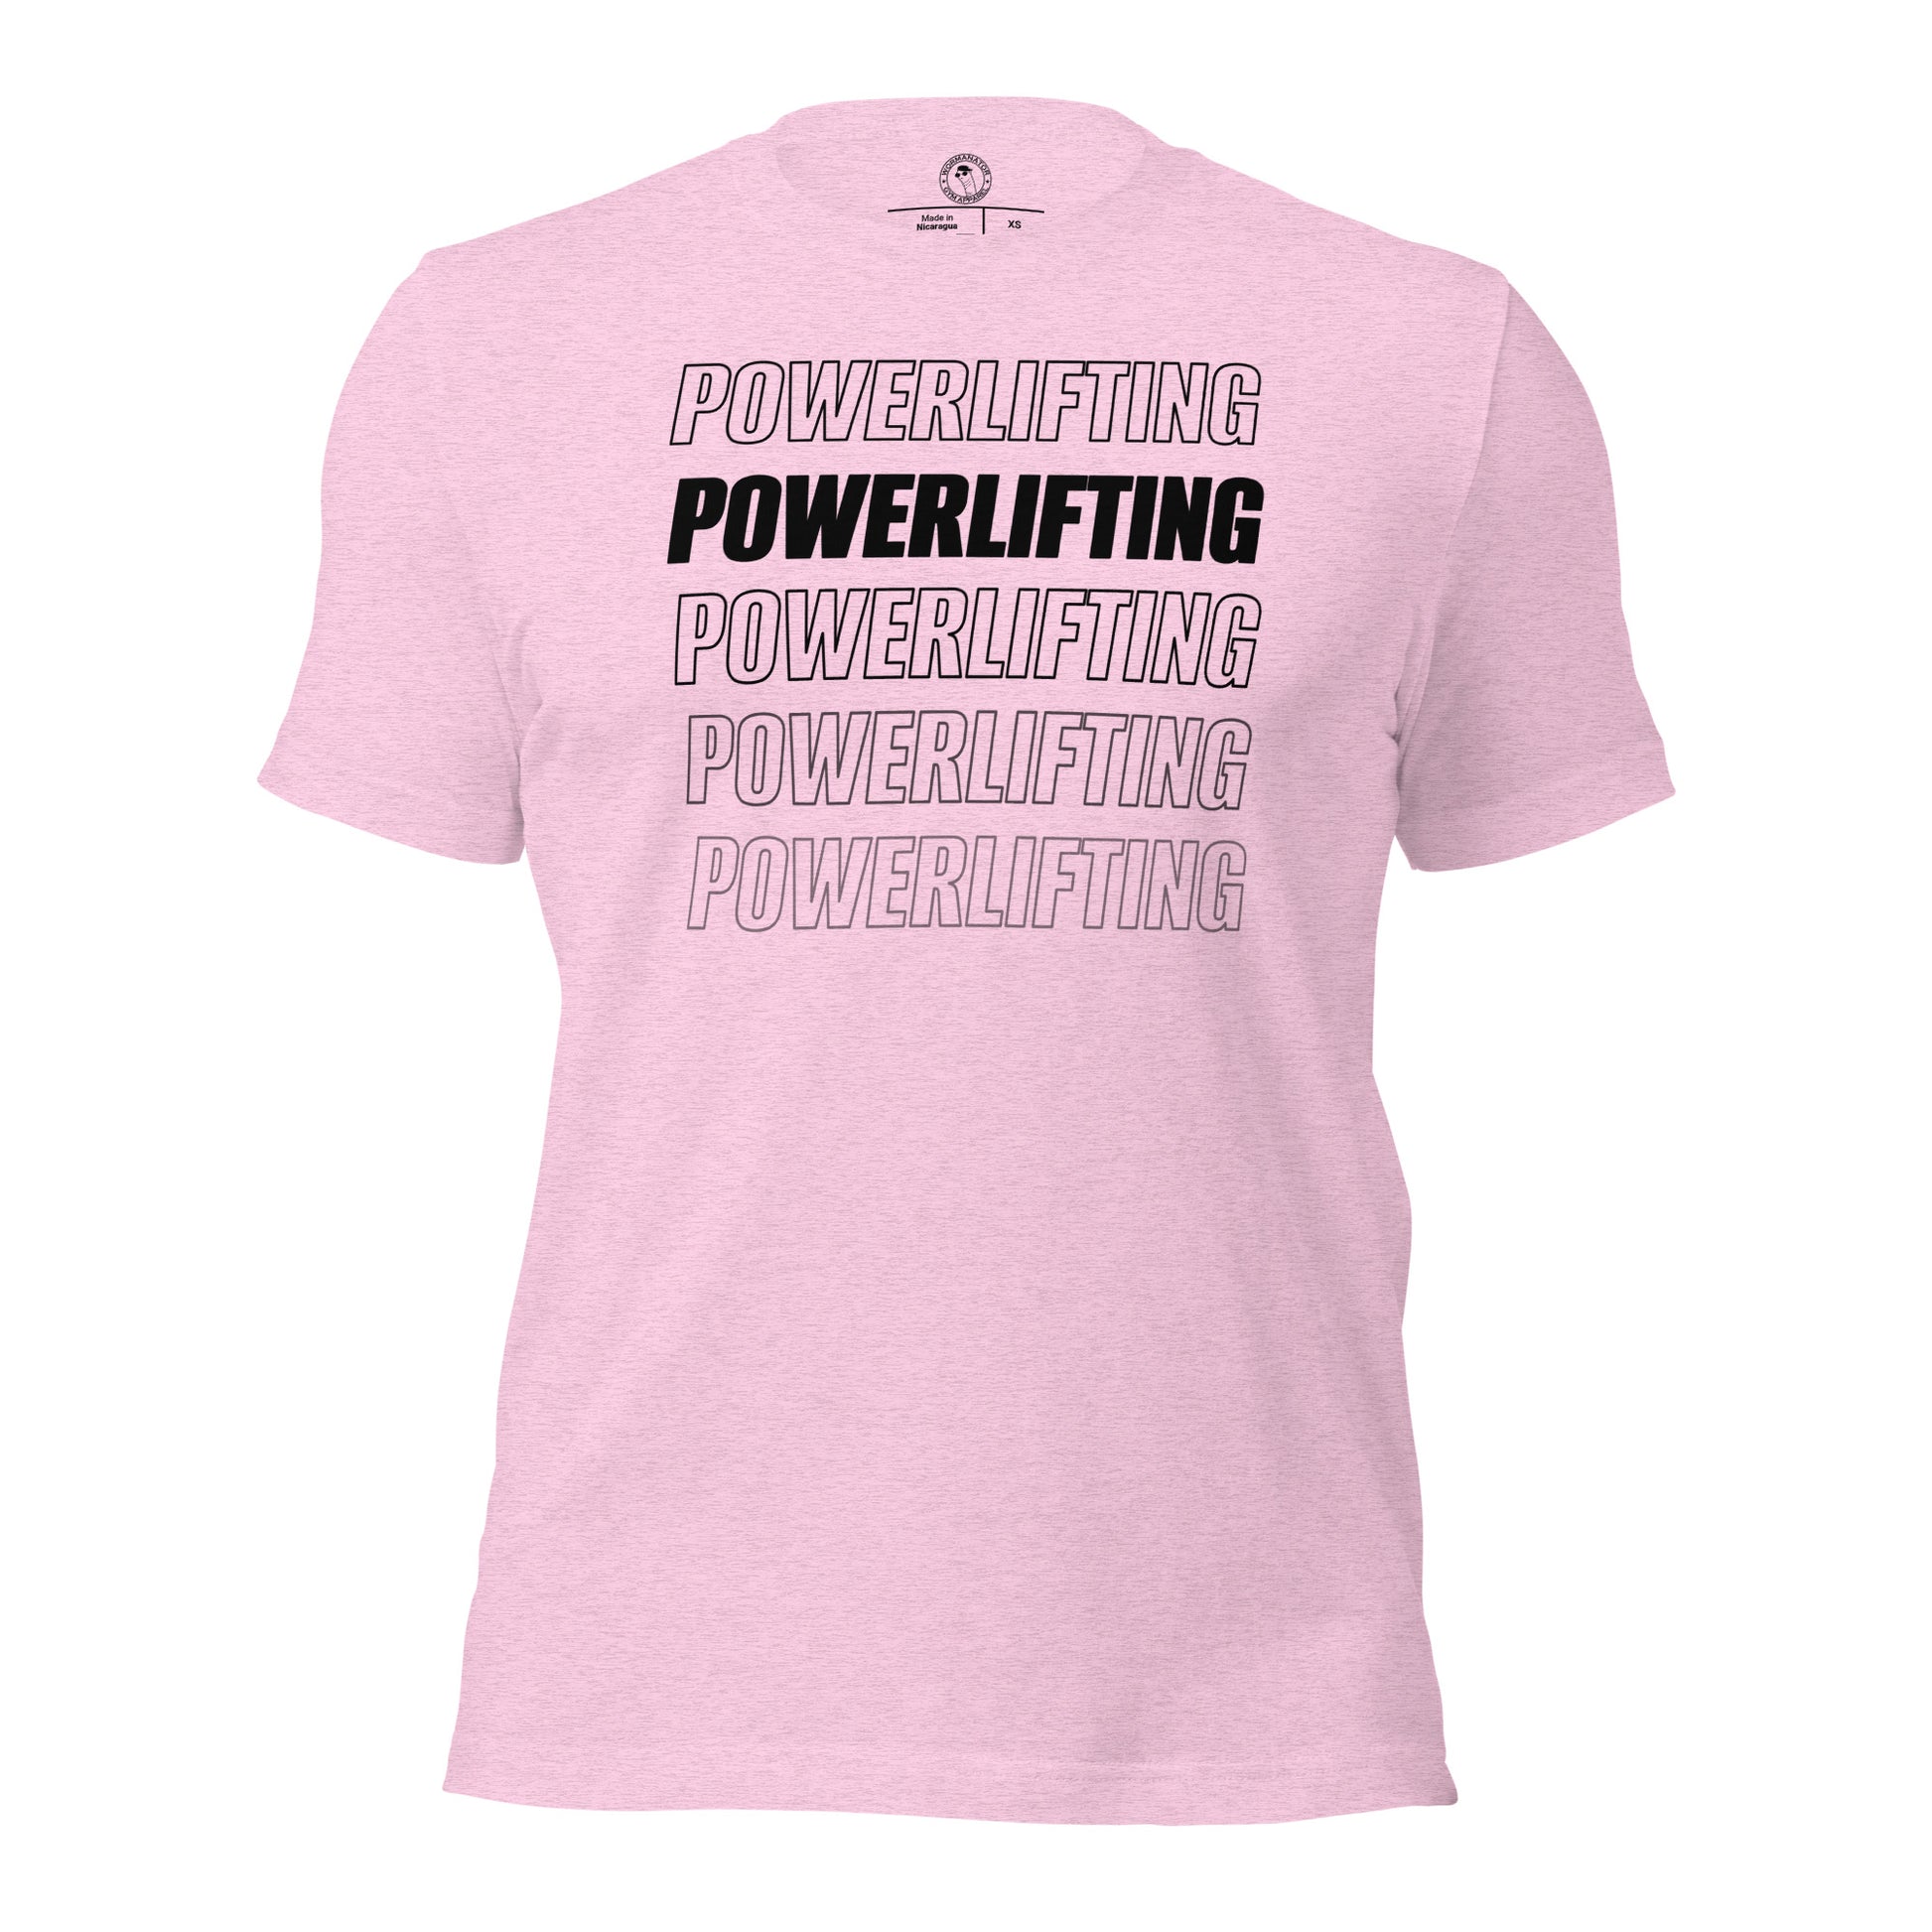 Powerlifting Shirt in Heather Prism Lilac